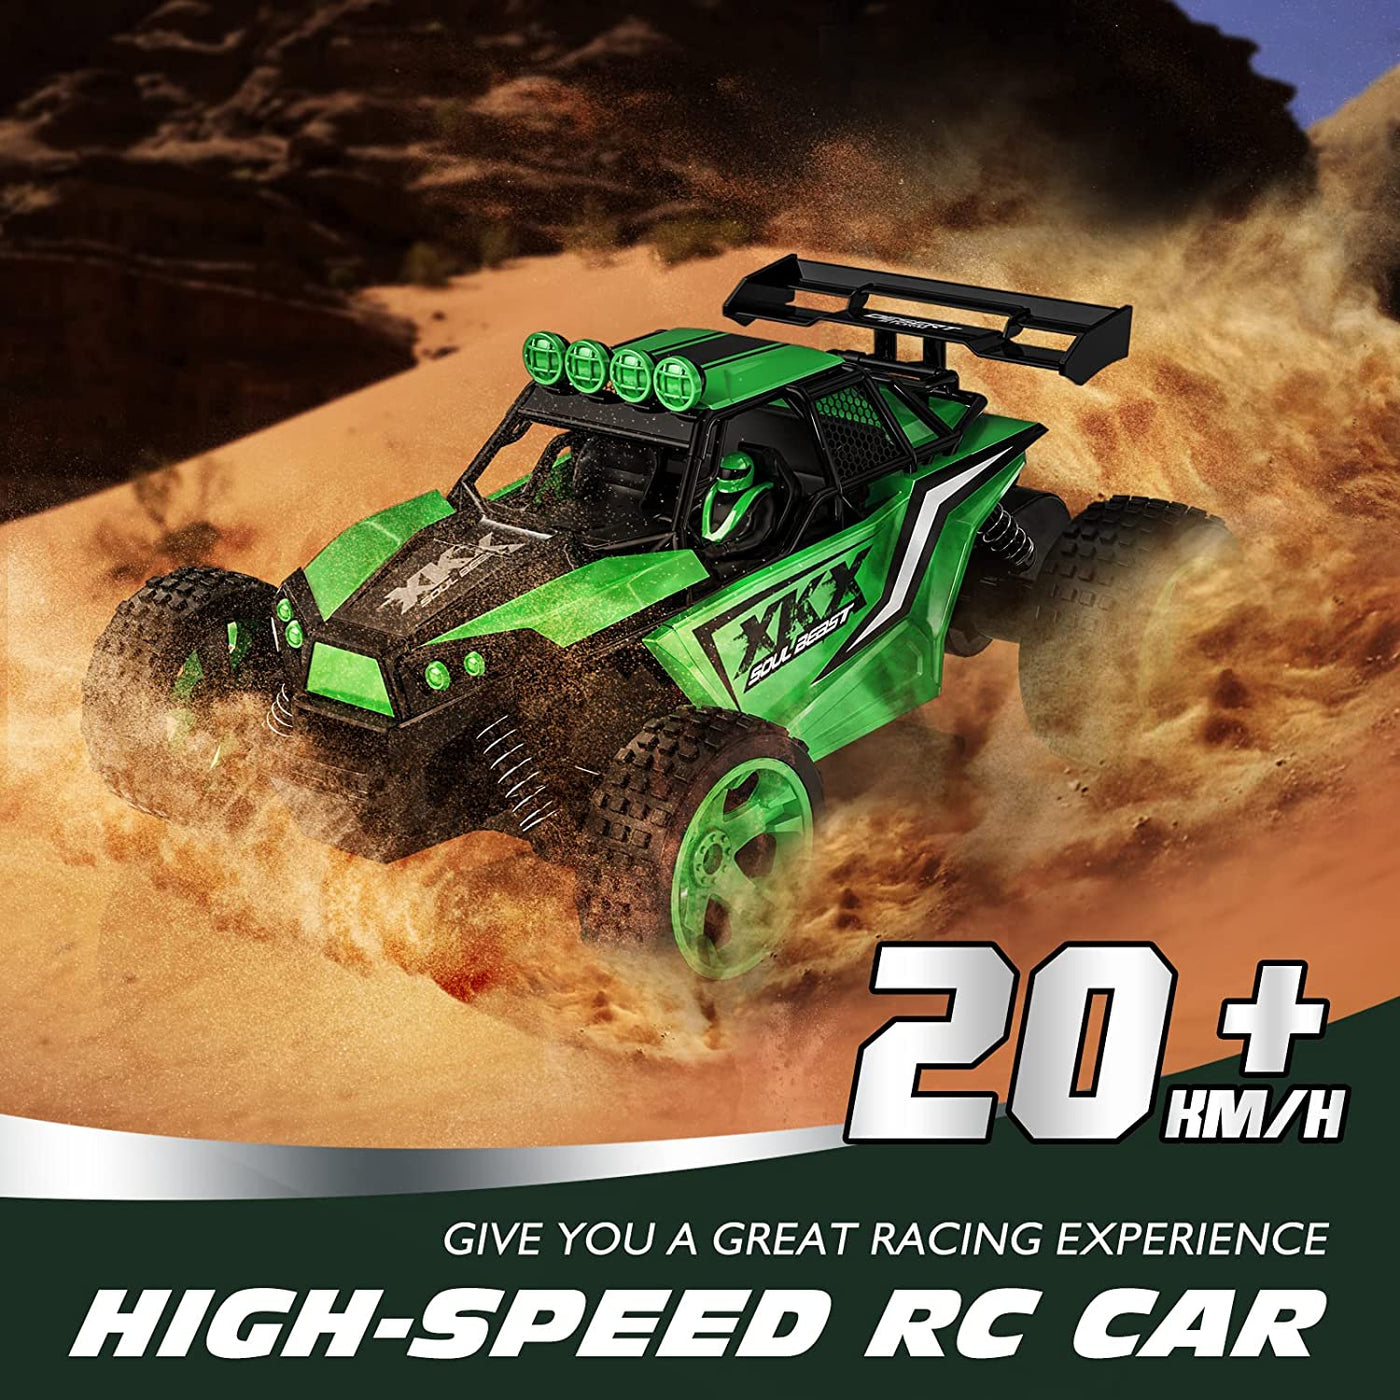   RC Car for Kids, High Speed, 2WD Offroad with Two Rechargeable Batteries for 60 Min Play